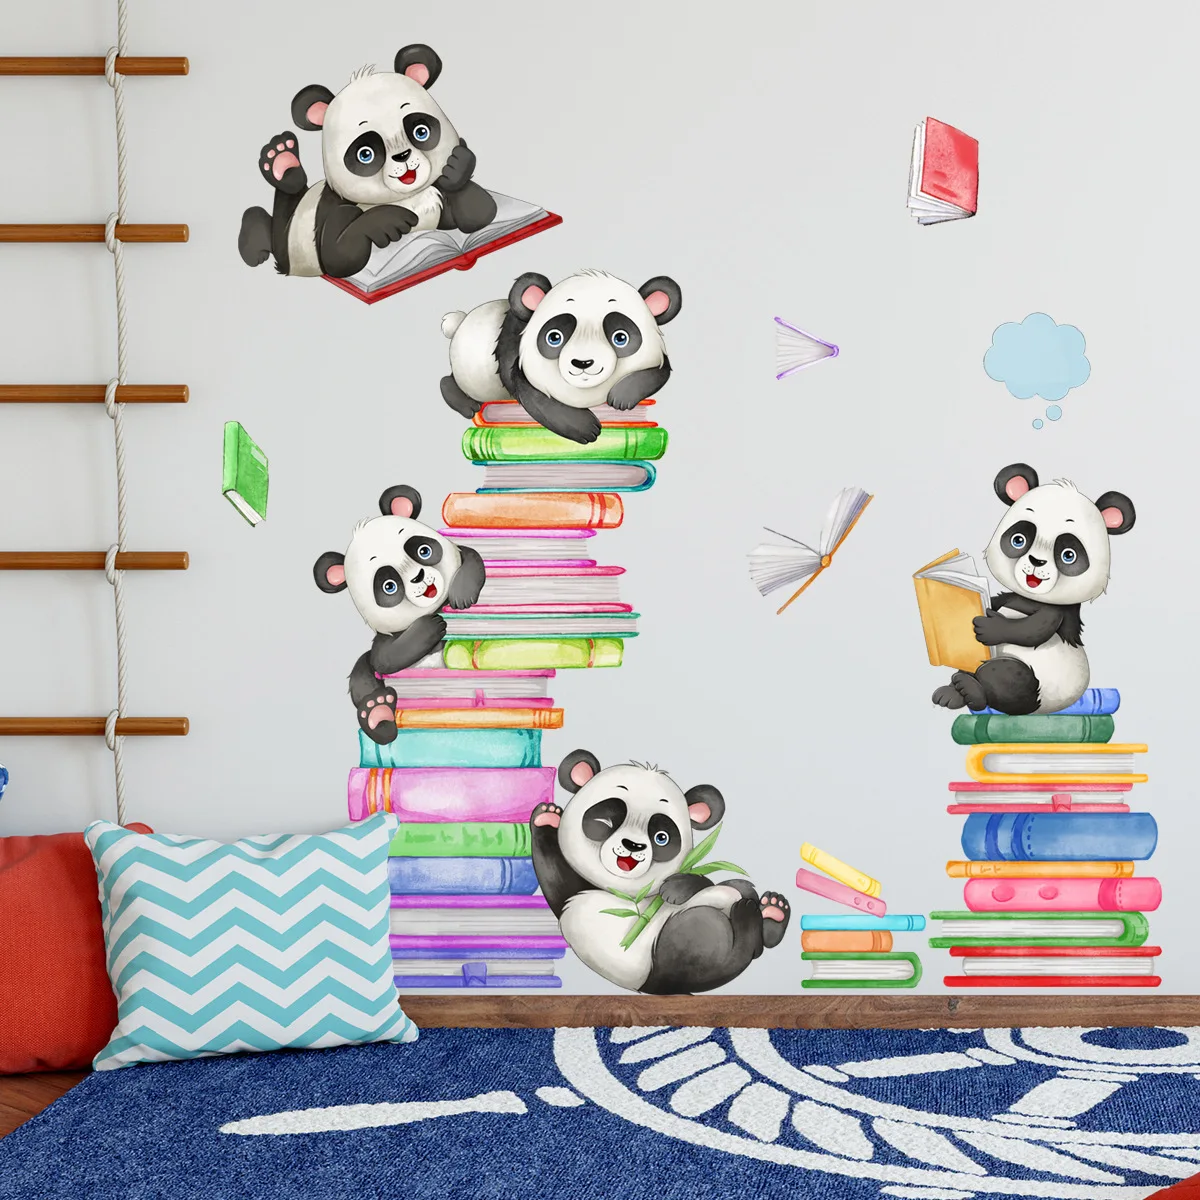 2pcs Animal Panda Book Cartoon Wall Stickers Dormitory Background Wall Home Decoration Wall Stickers Mural Wallpaper Ms6263 handheld paint roller box fit for 5 inch roller liquid wallpaper decoration paint tool paint roller tray roller plastic cup